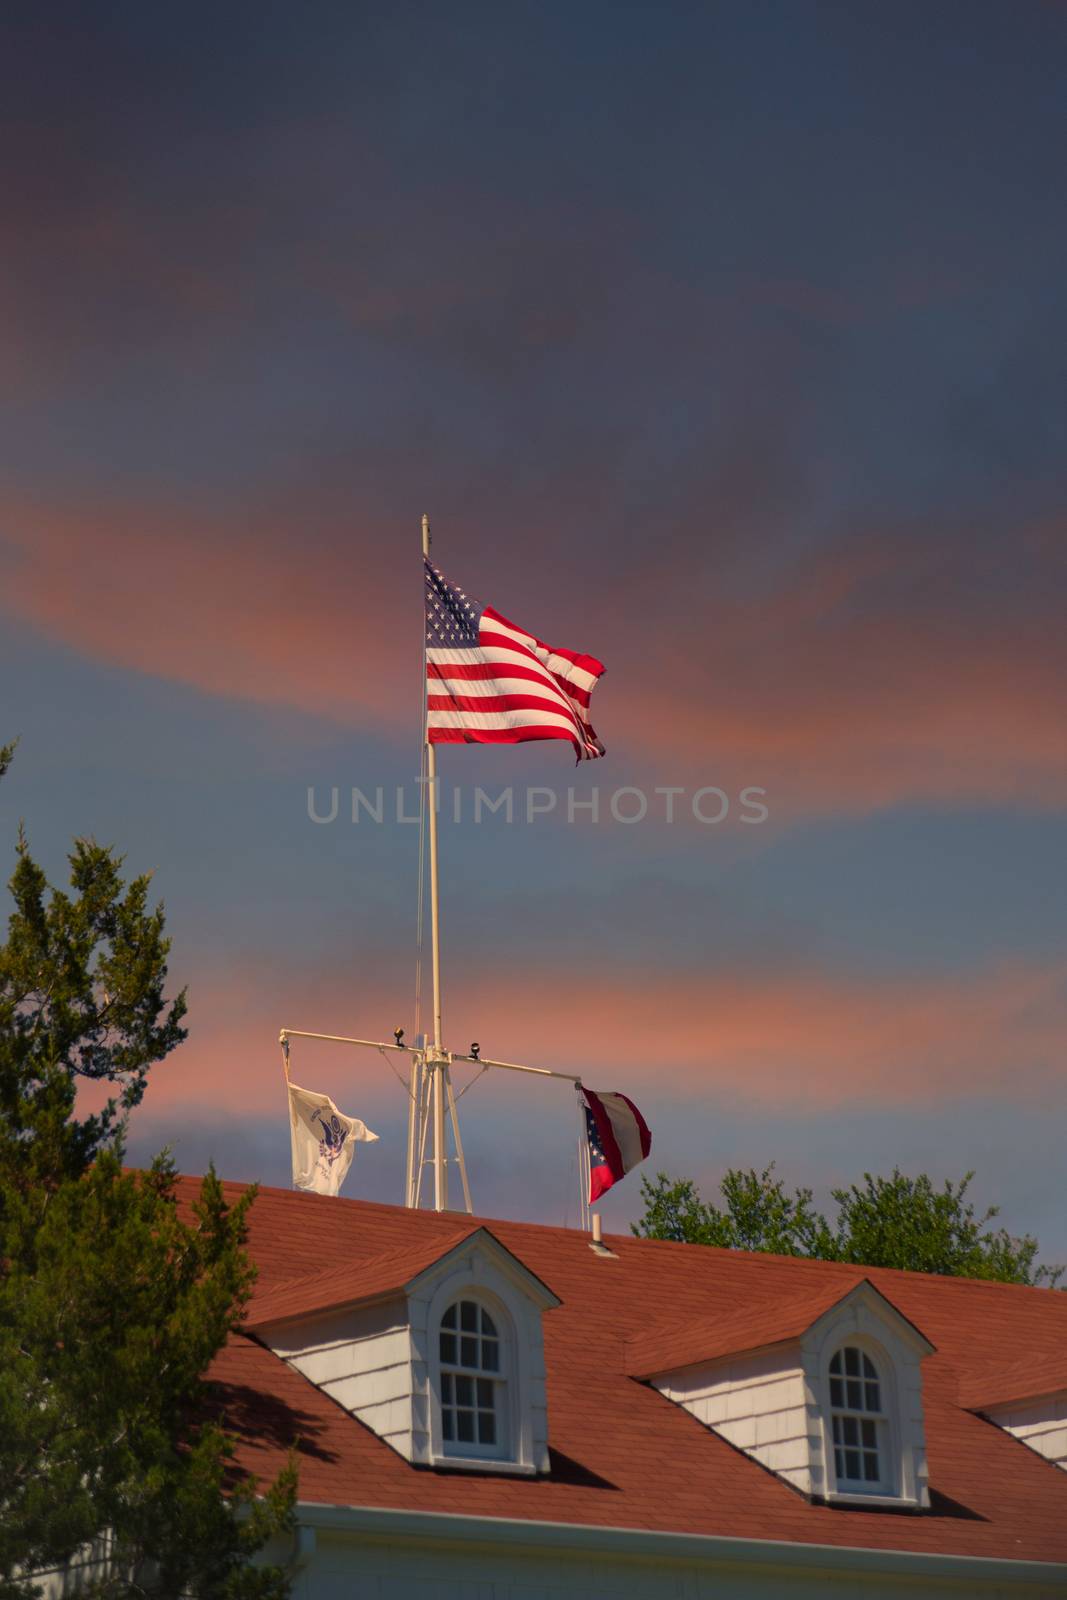 The American flag flying against a clear blue sky over a red roof with dormers